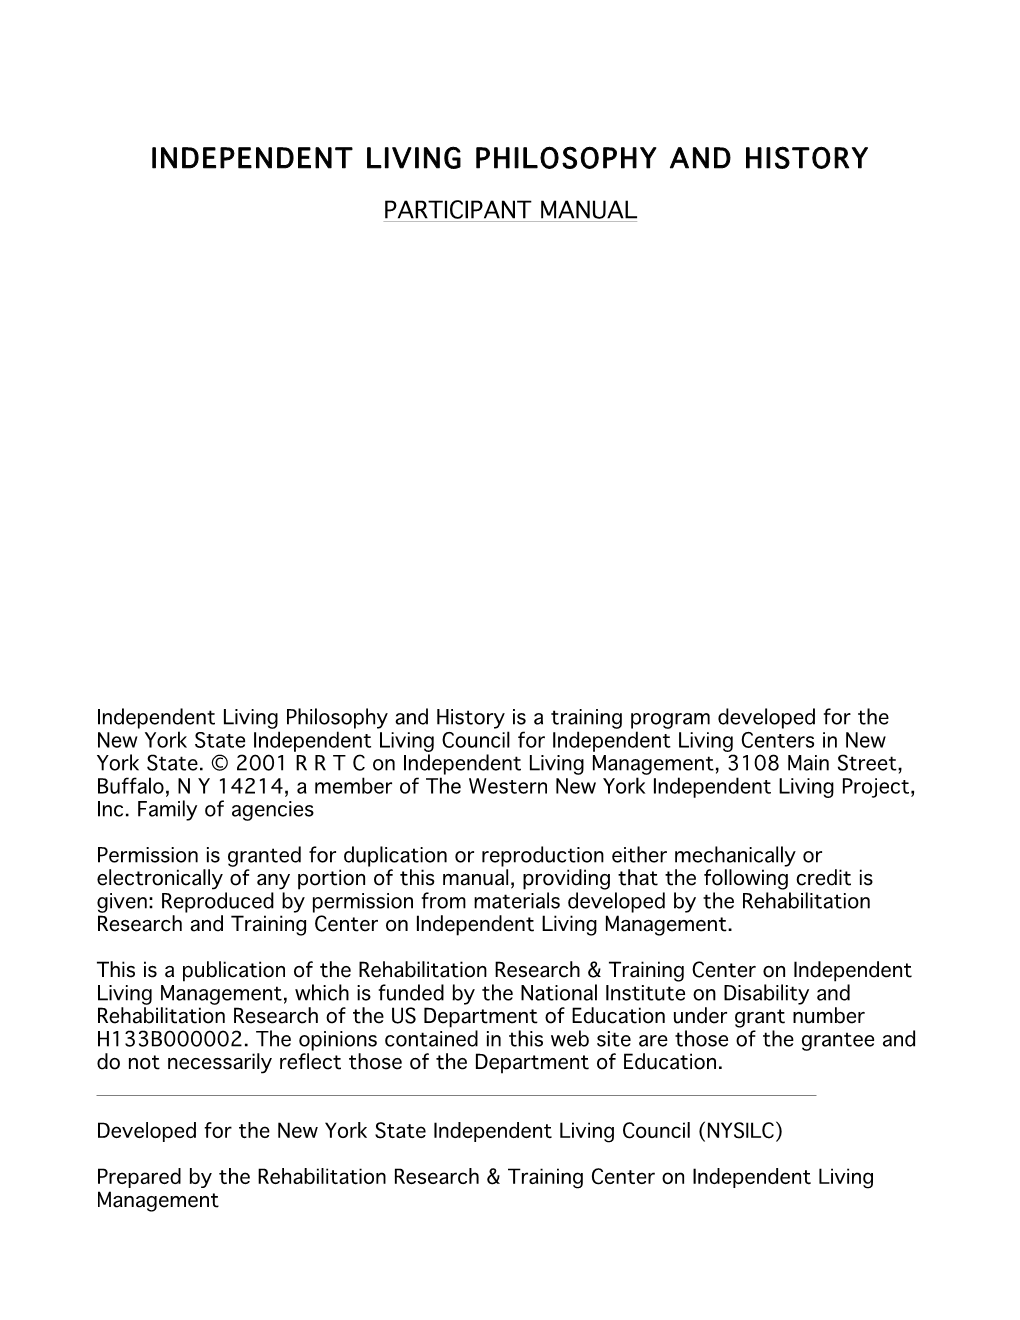 Independent Living Philosophy and History